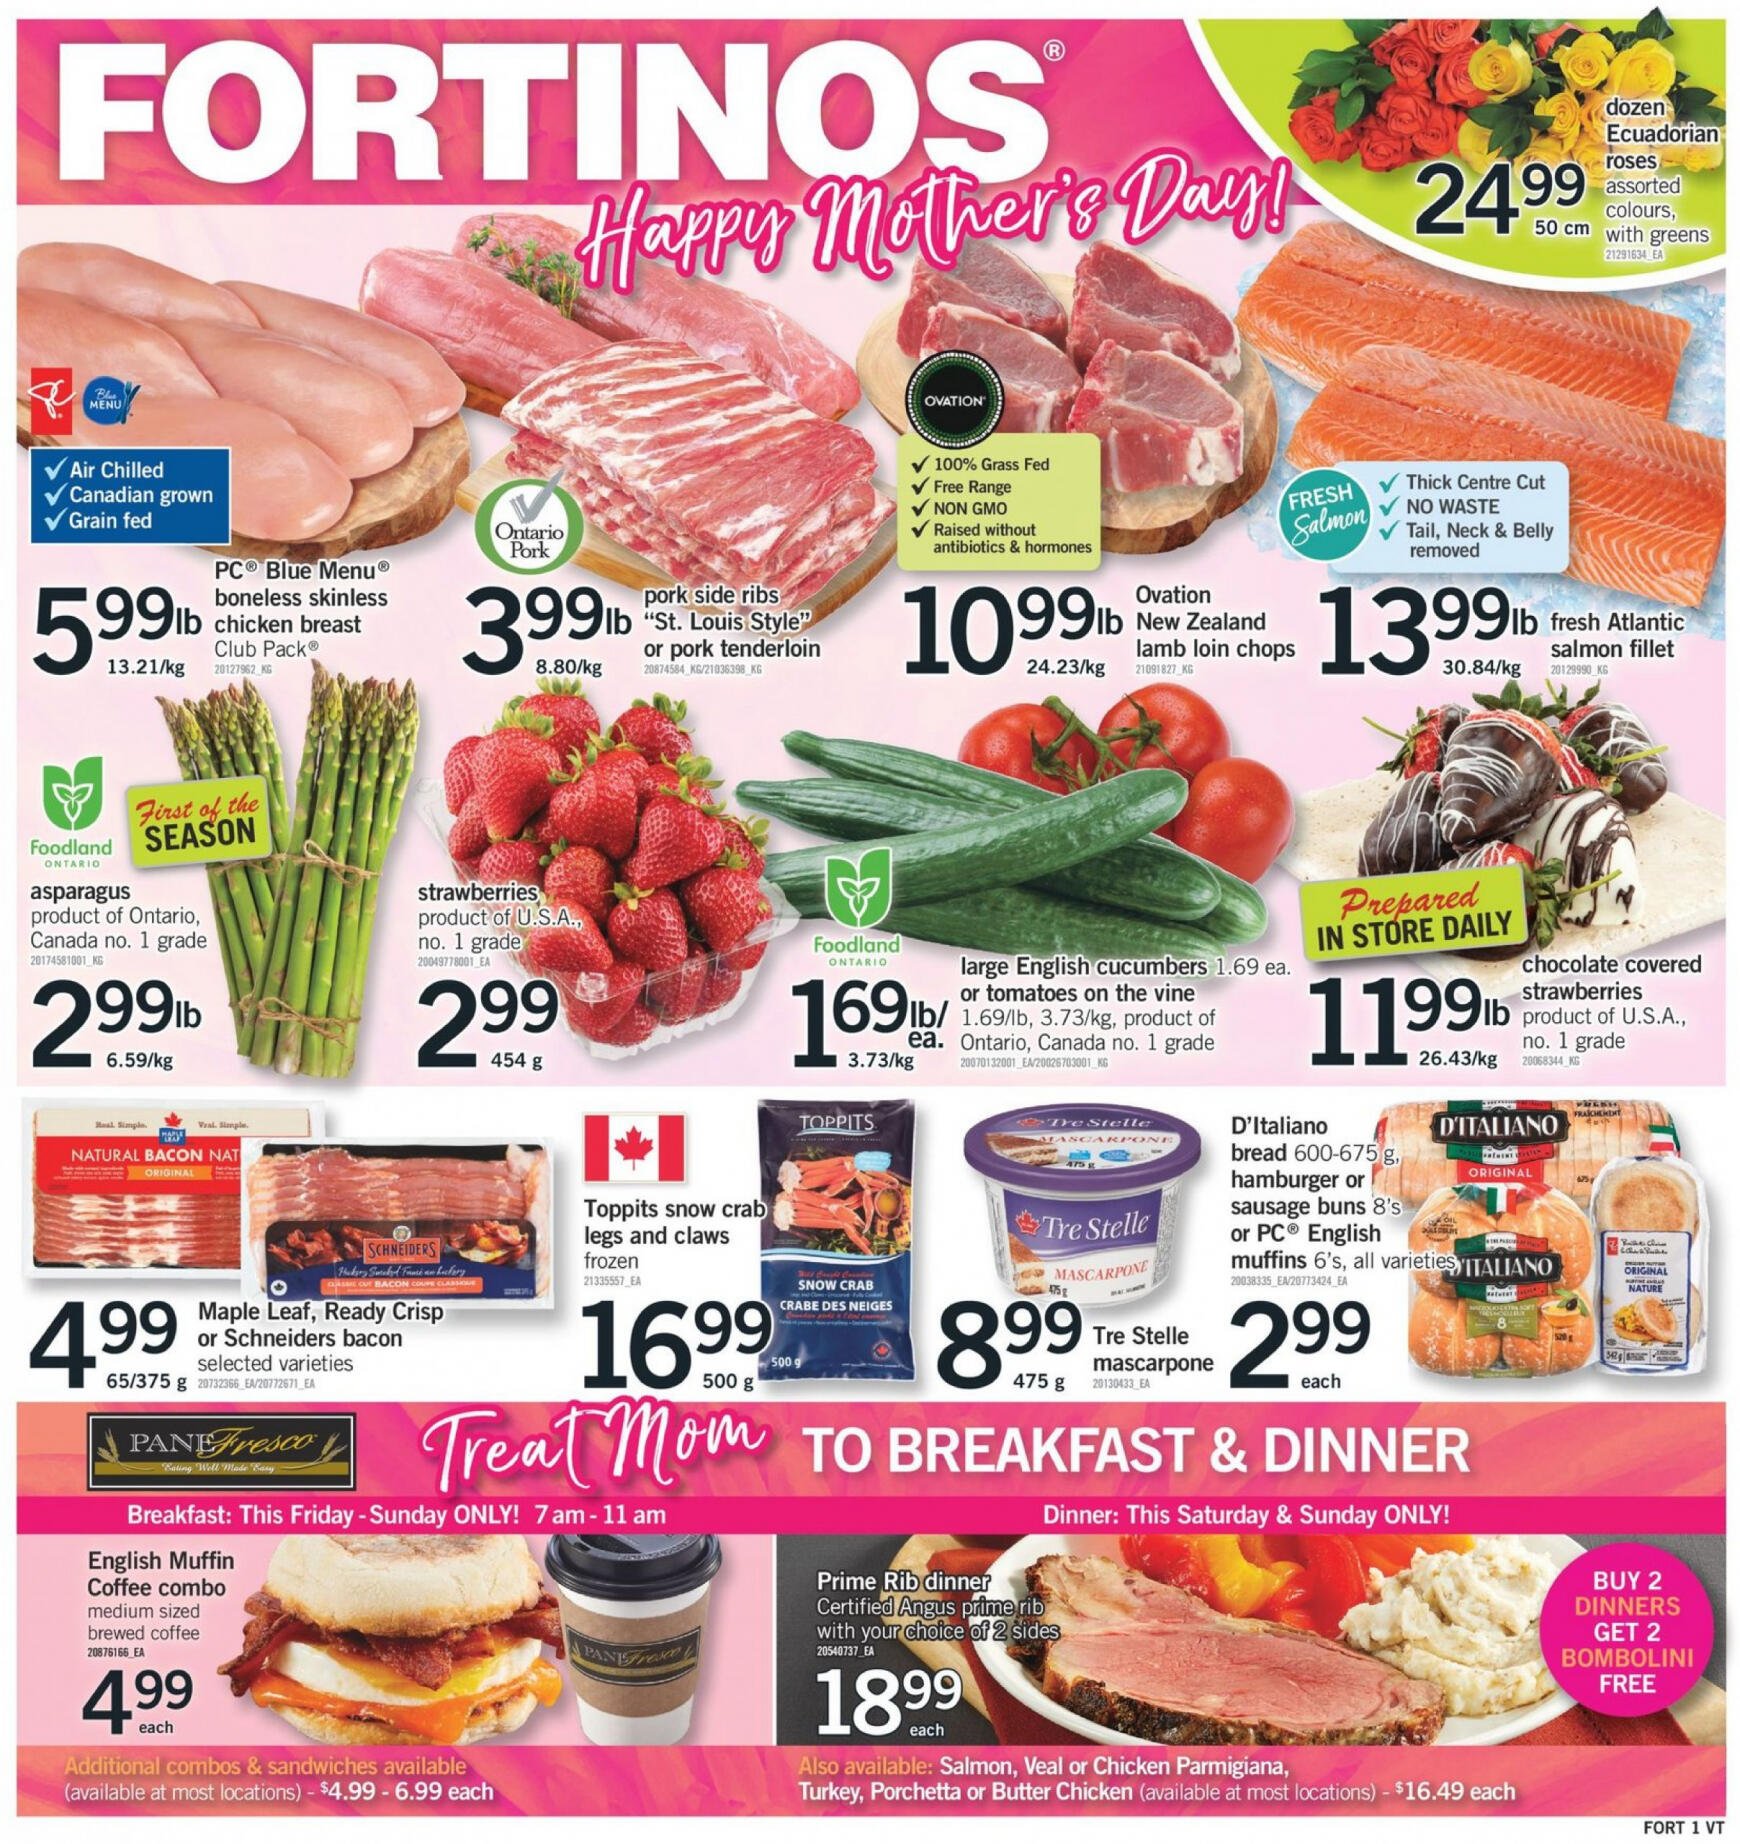 fortinos - Fortinos flyer current 09.05. - 15.05. - page: 1